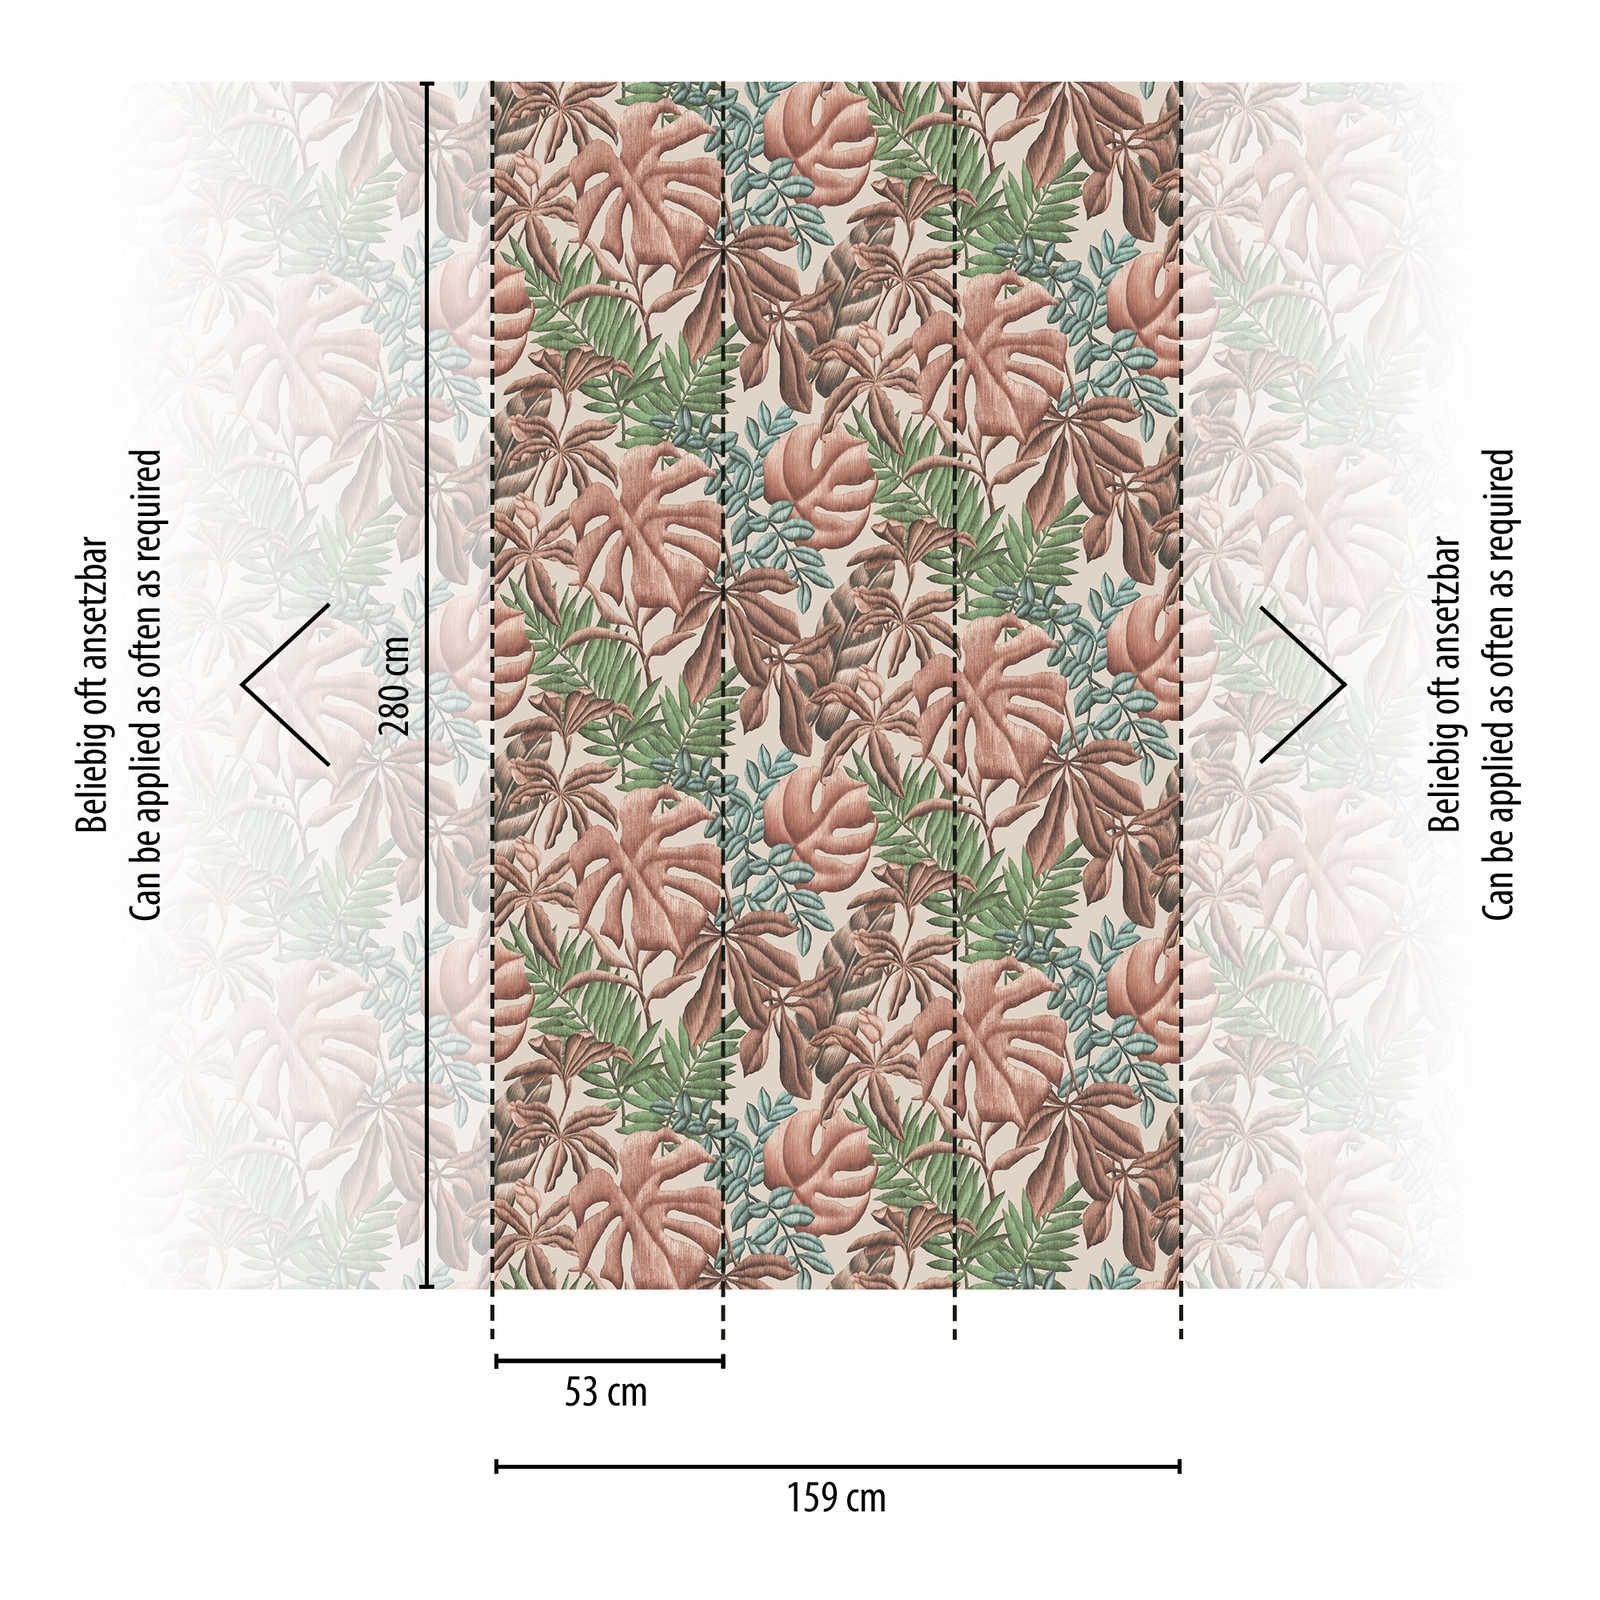             Leaf pattern non-woven wallpaper with banana leaves & fern - pink, green, cream
        